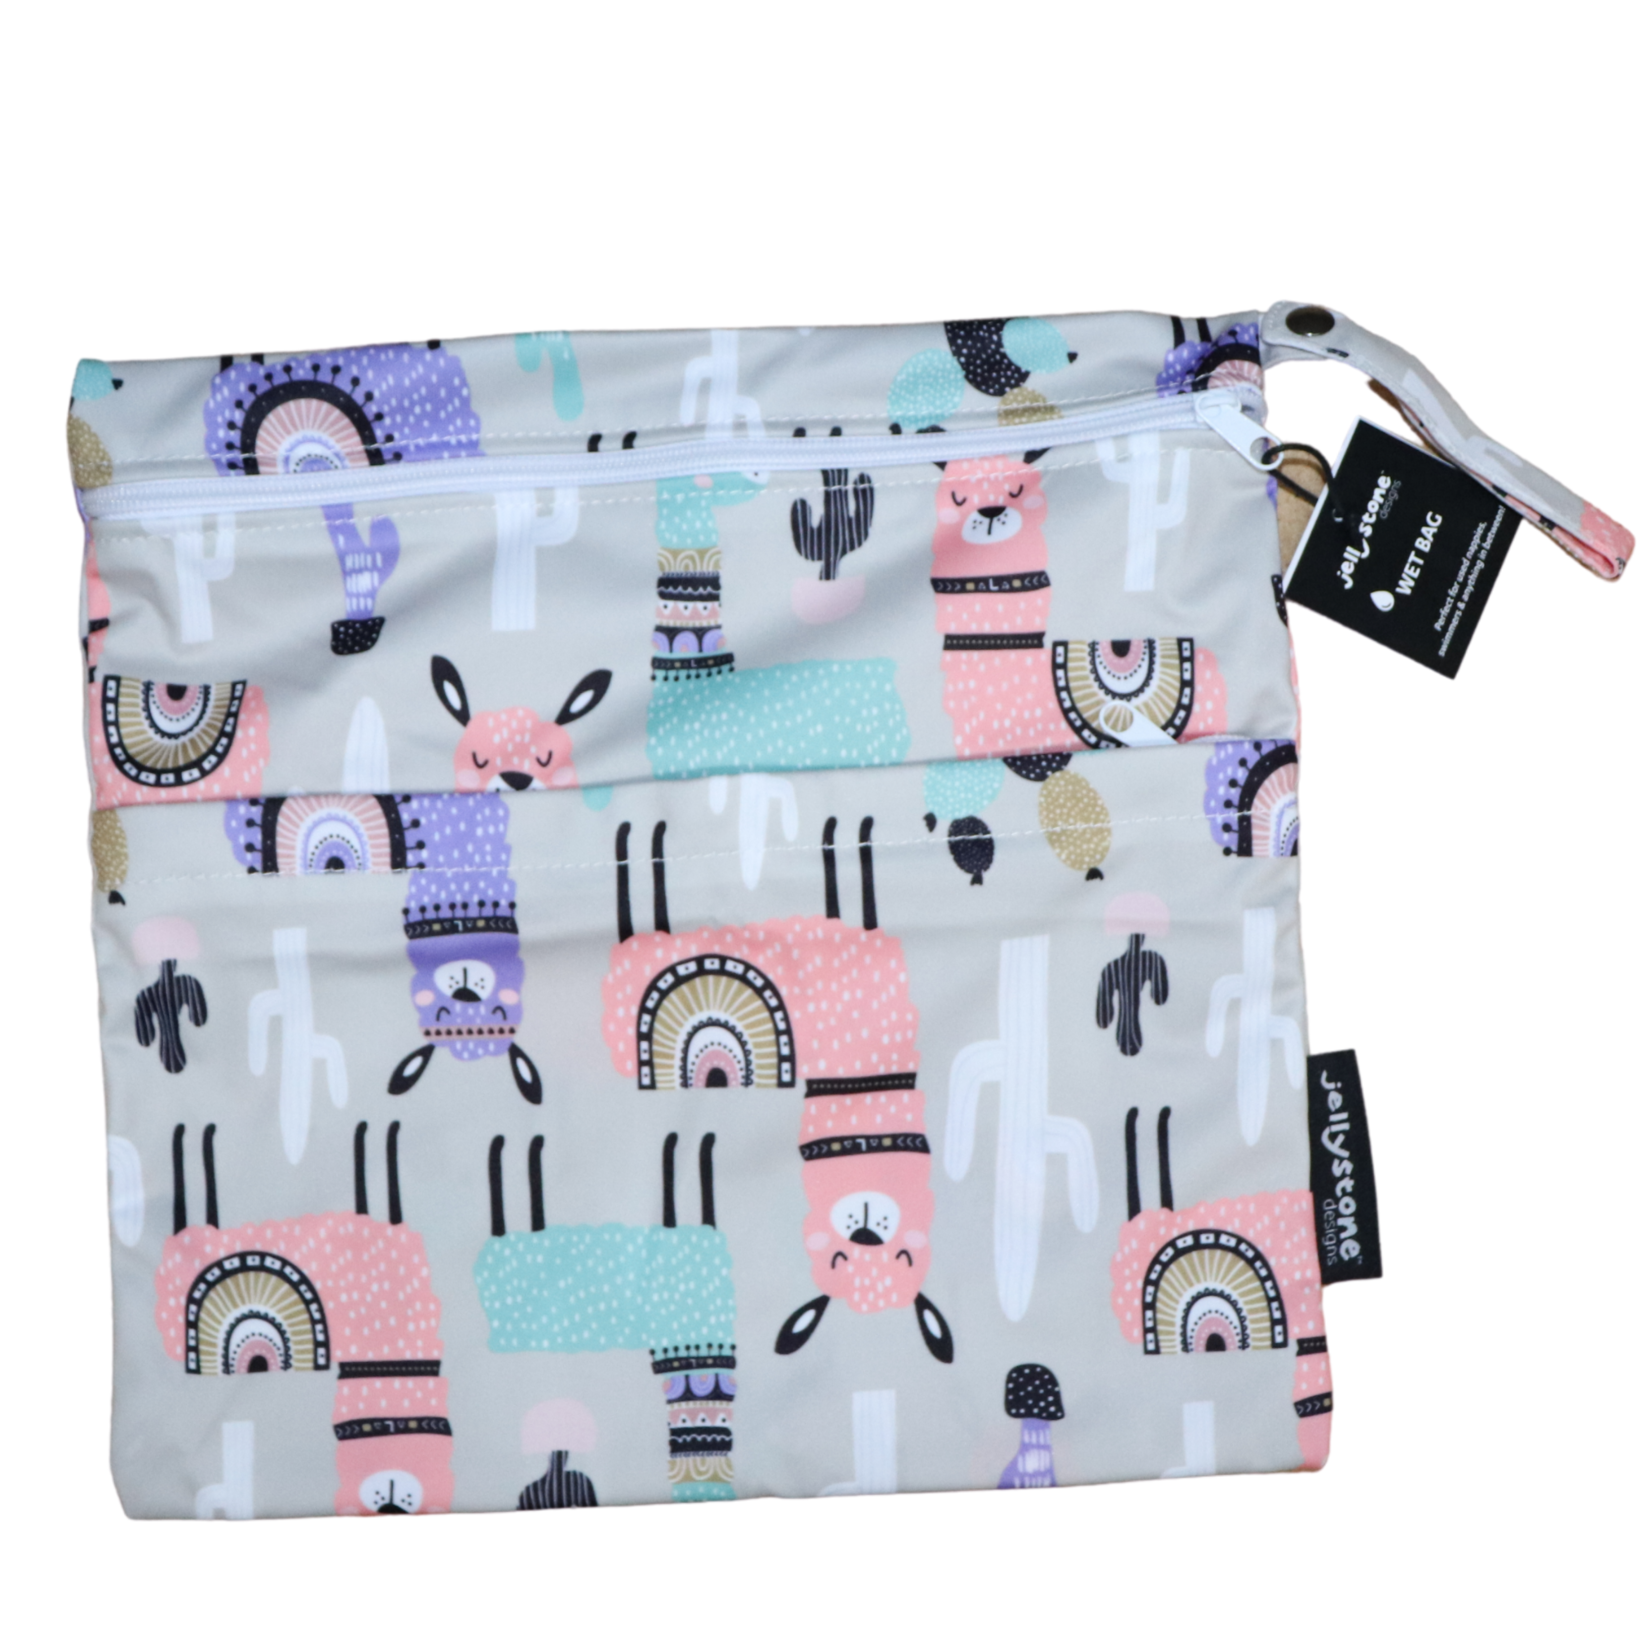 Jellystone Designs JELLYSTONE WET BAGIntroducing Jellystone Design's new wet bag for all your on-the-go changing needs!   Transport your dry and wet cloth nappies hygienically and with ease with one of our wet bags. They help contain odours and leakages, keeping your bag fr